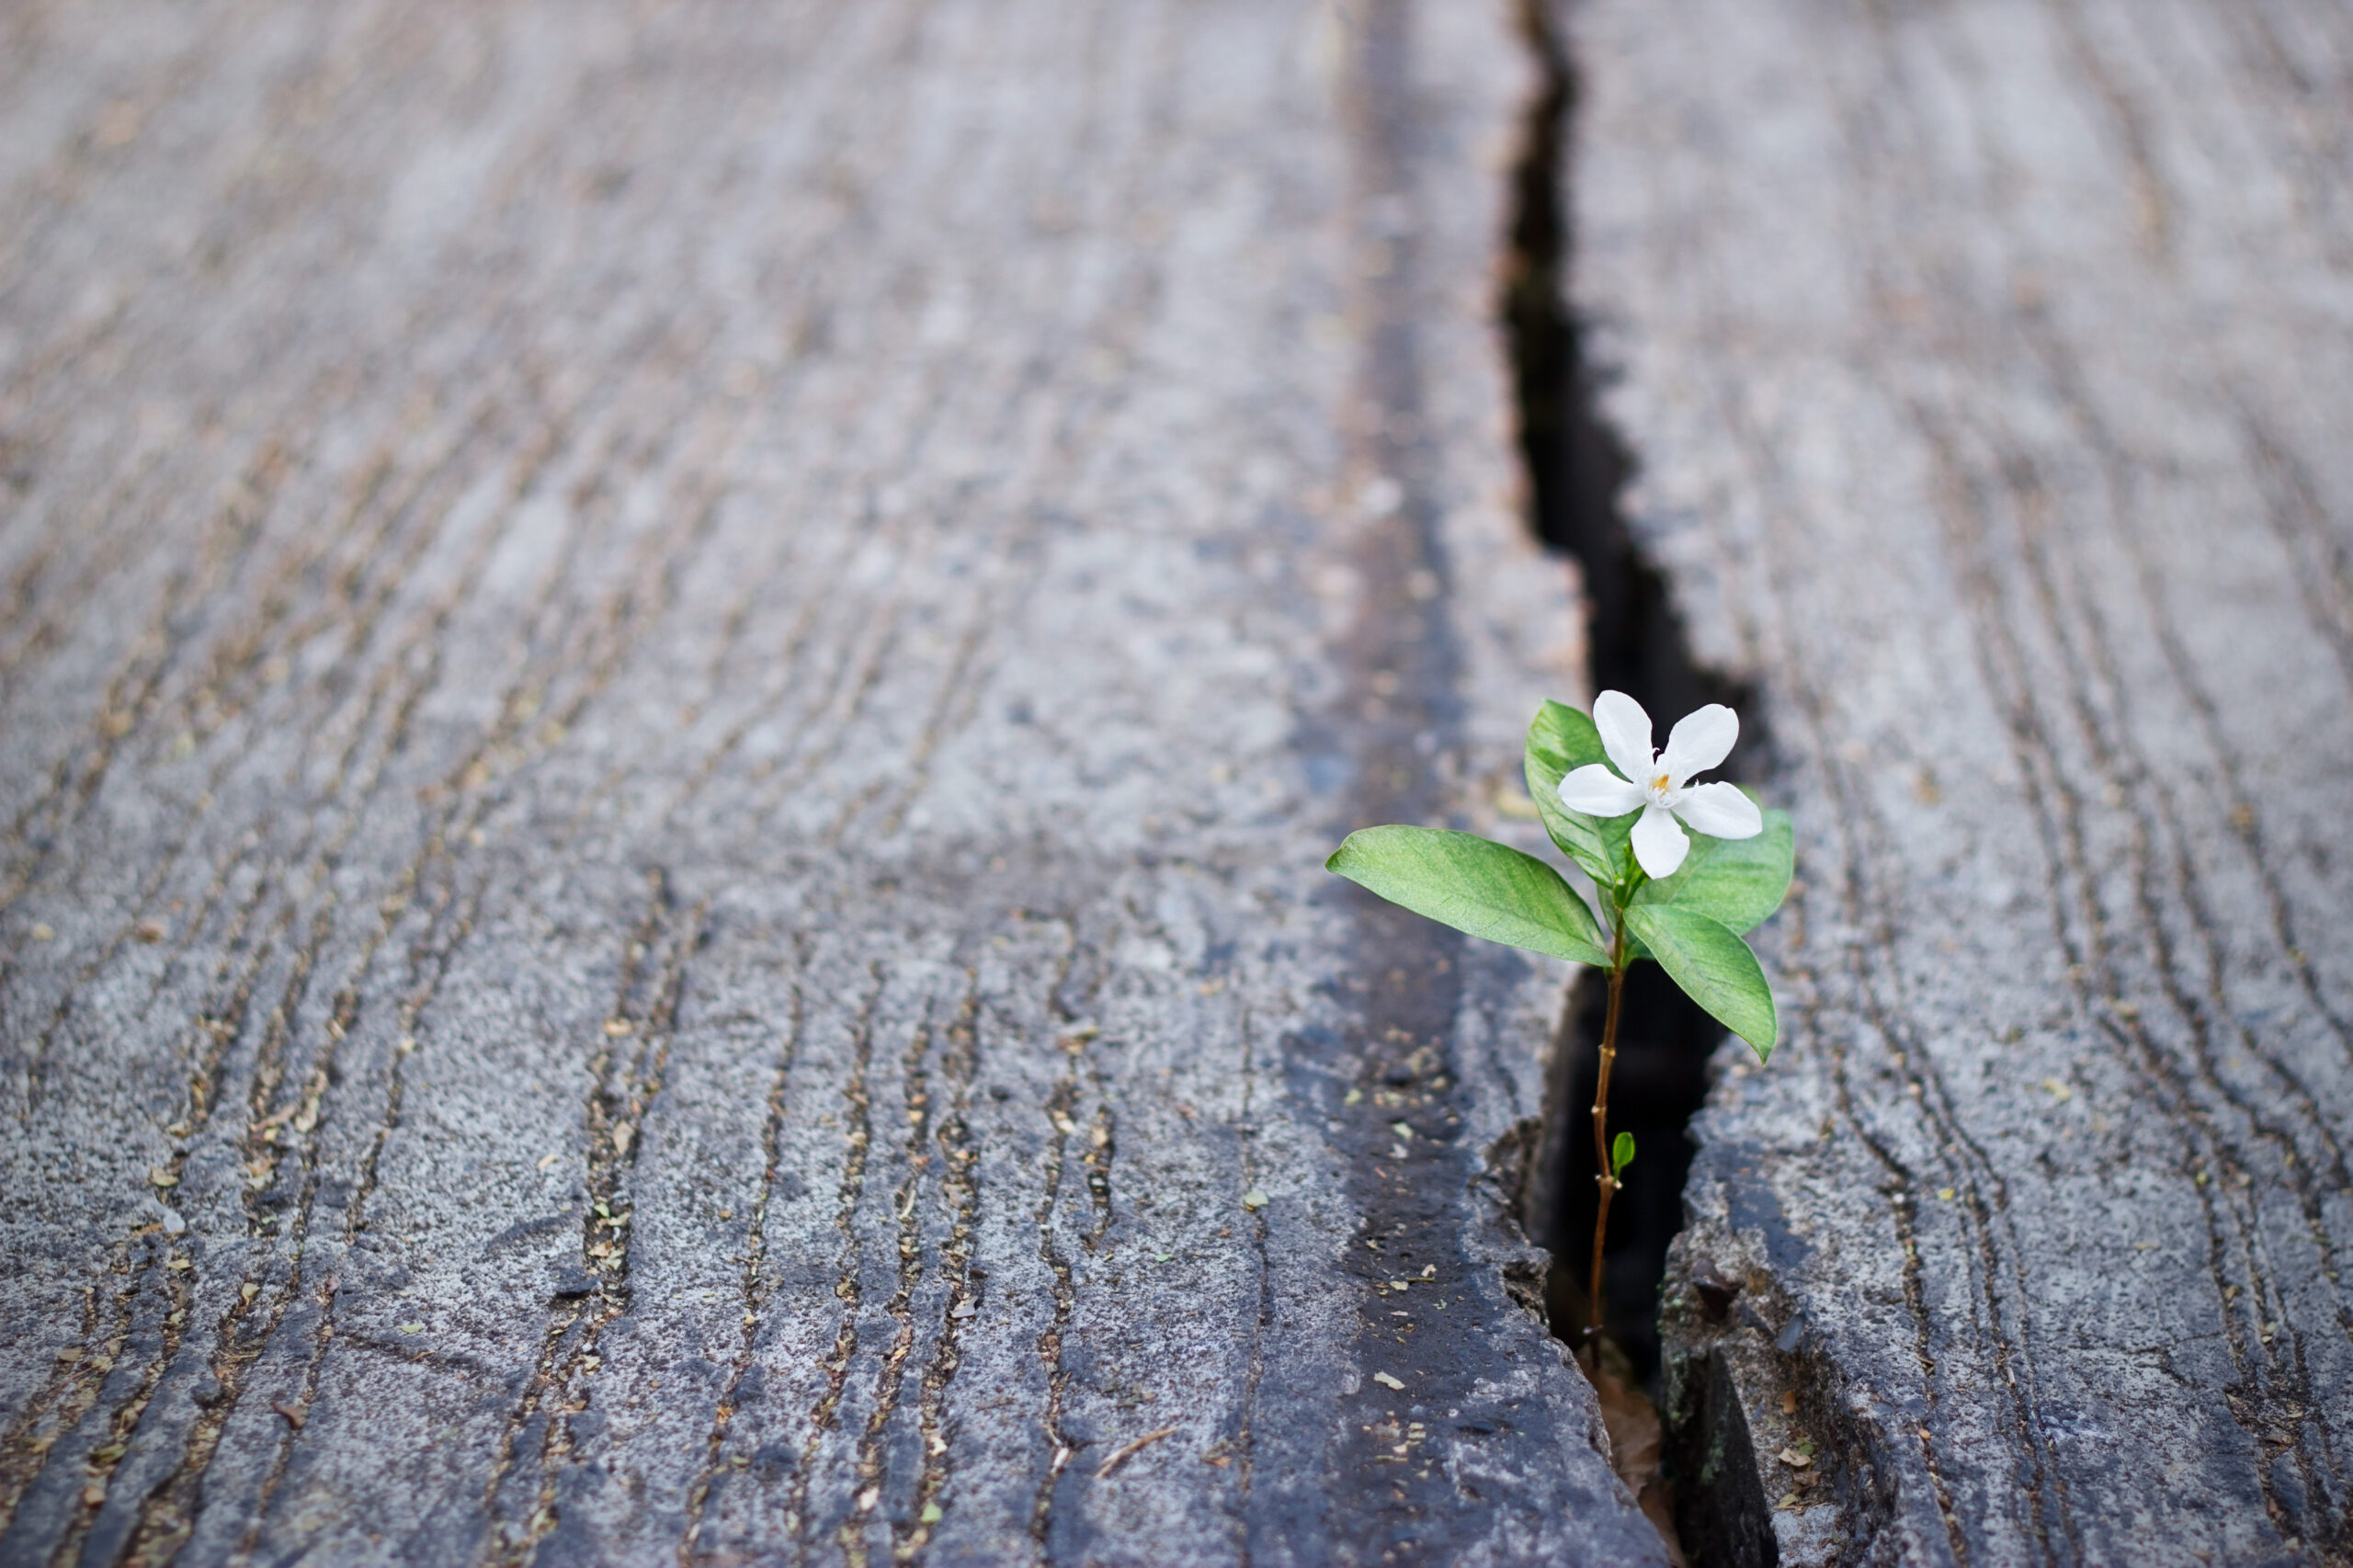 A small white flower with green leaves sprouts out of a crack in the concrete